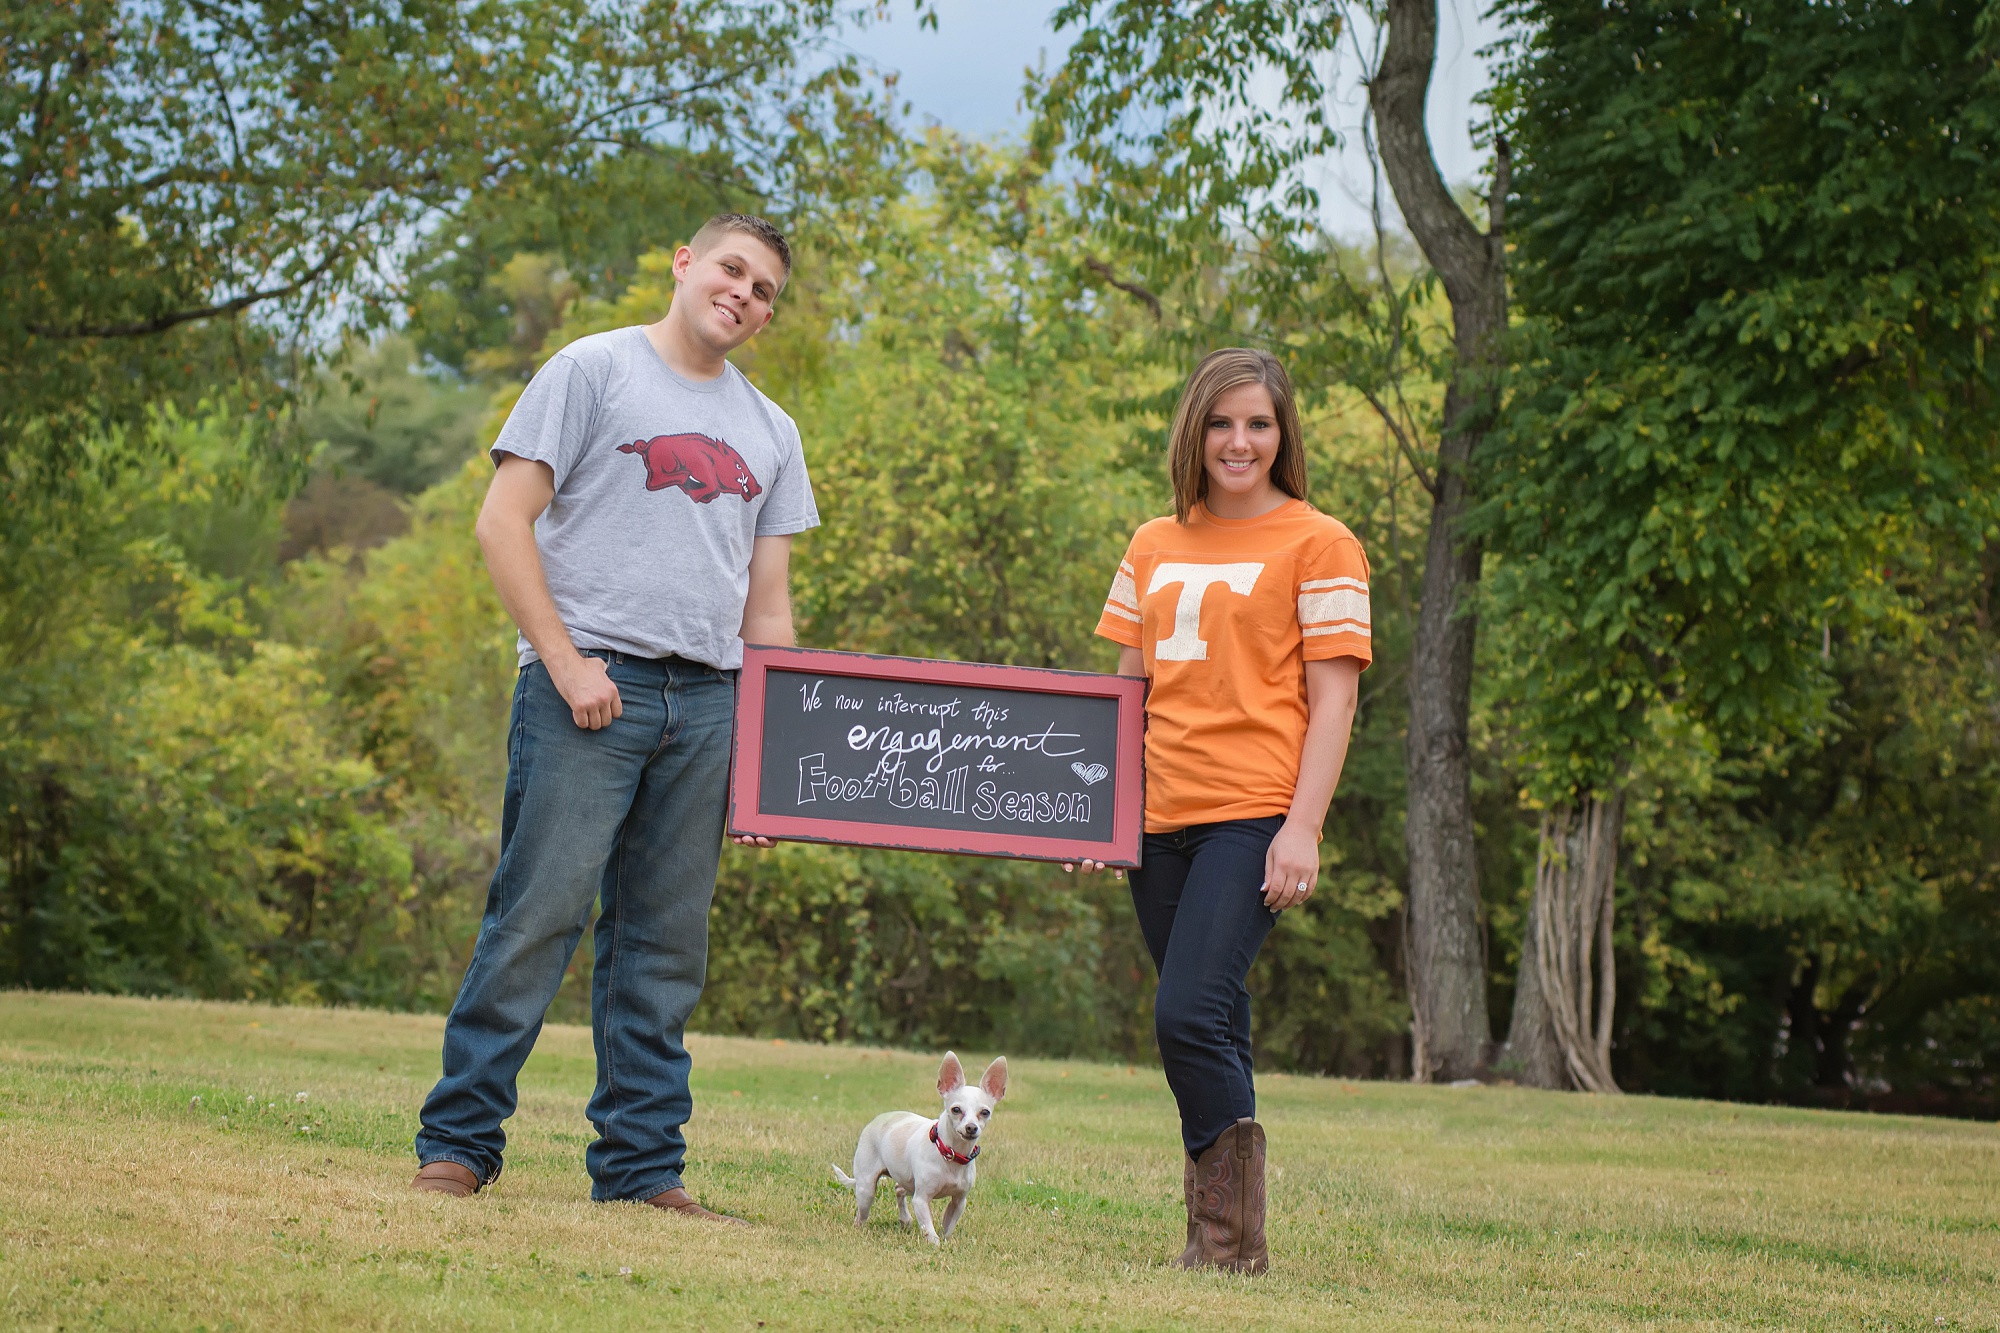 Engagement Session in Lascassas Tennessee at Jon Haven Farm, Murfreesboro TN on The Square and Cannonsburgh Village